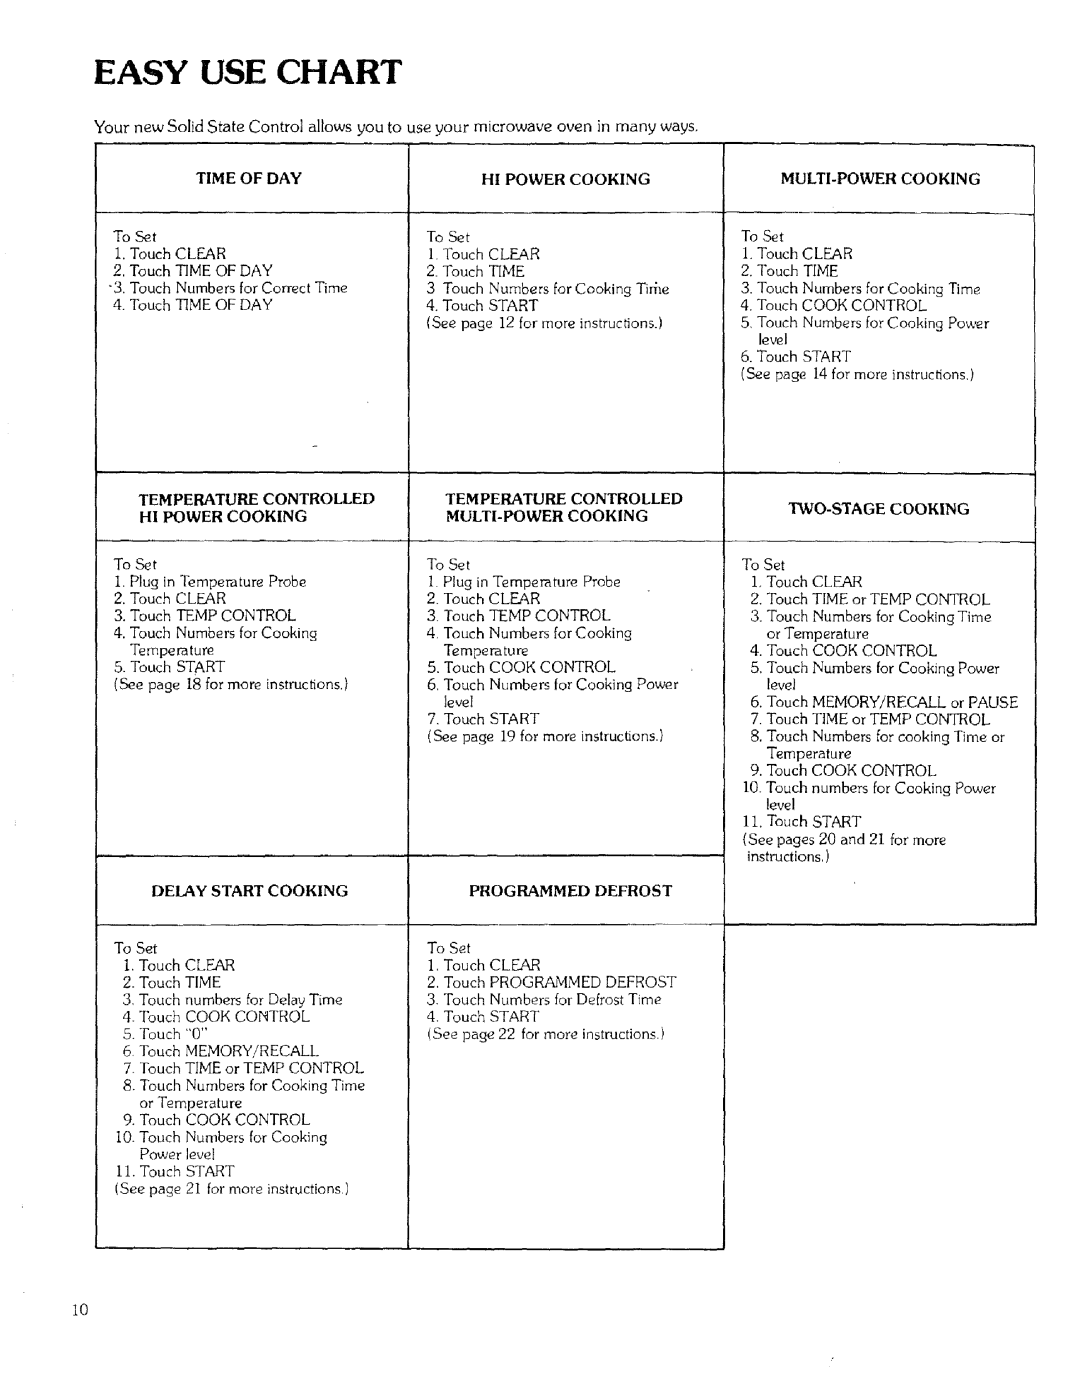 Kenmore 99721 manual Easy Use Chart 